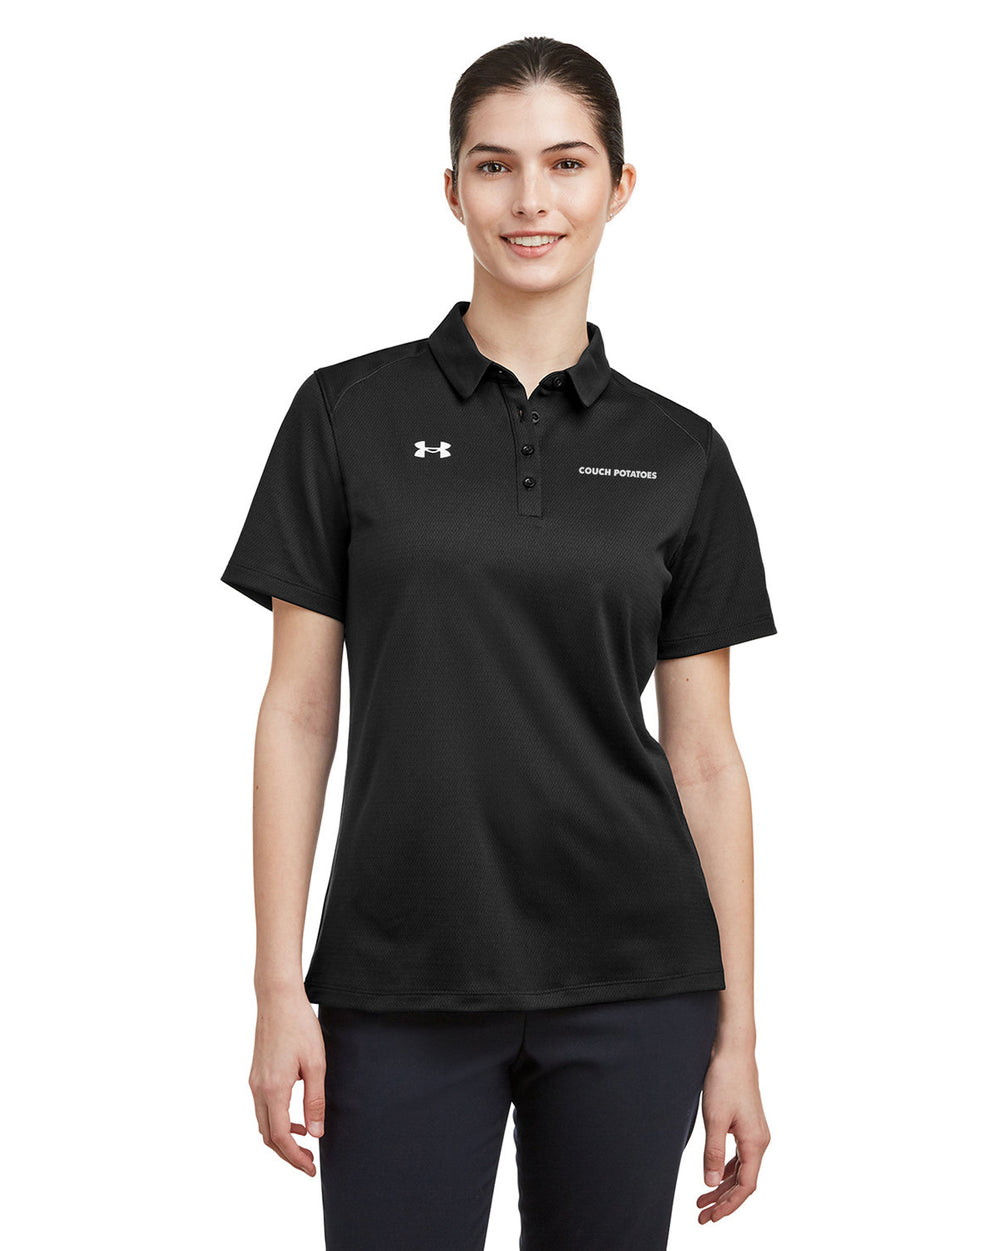 Couch Potatoes - Under Armour Ladies' Tech Polo - 1370431